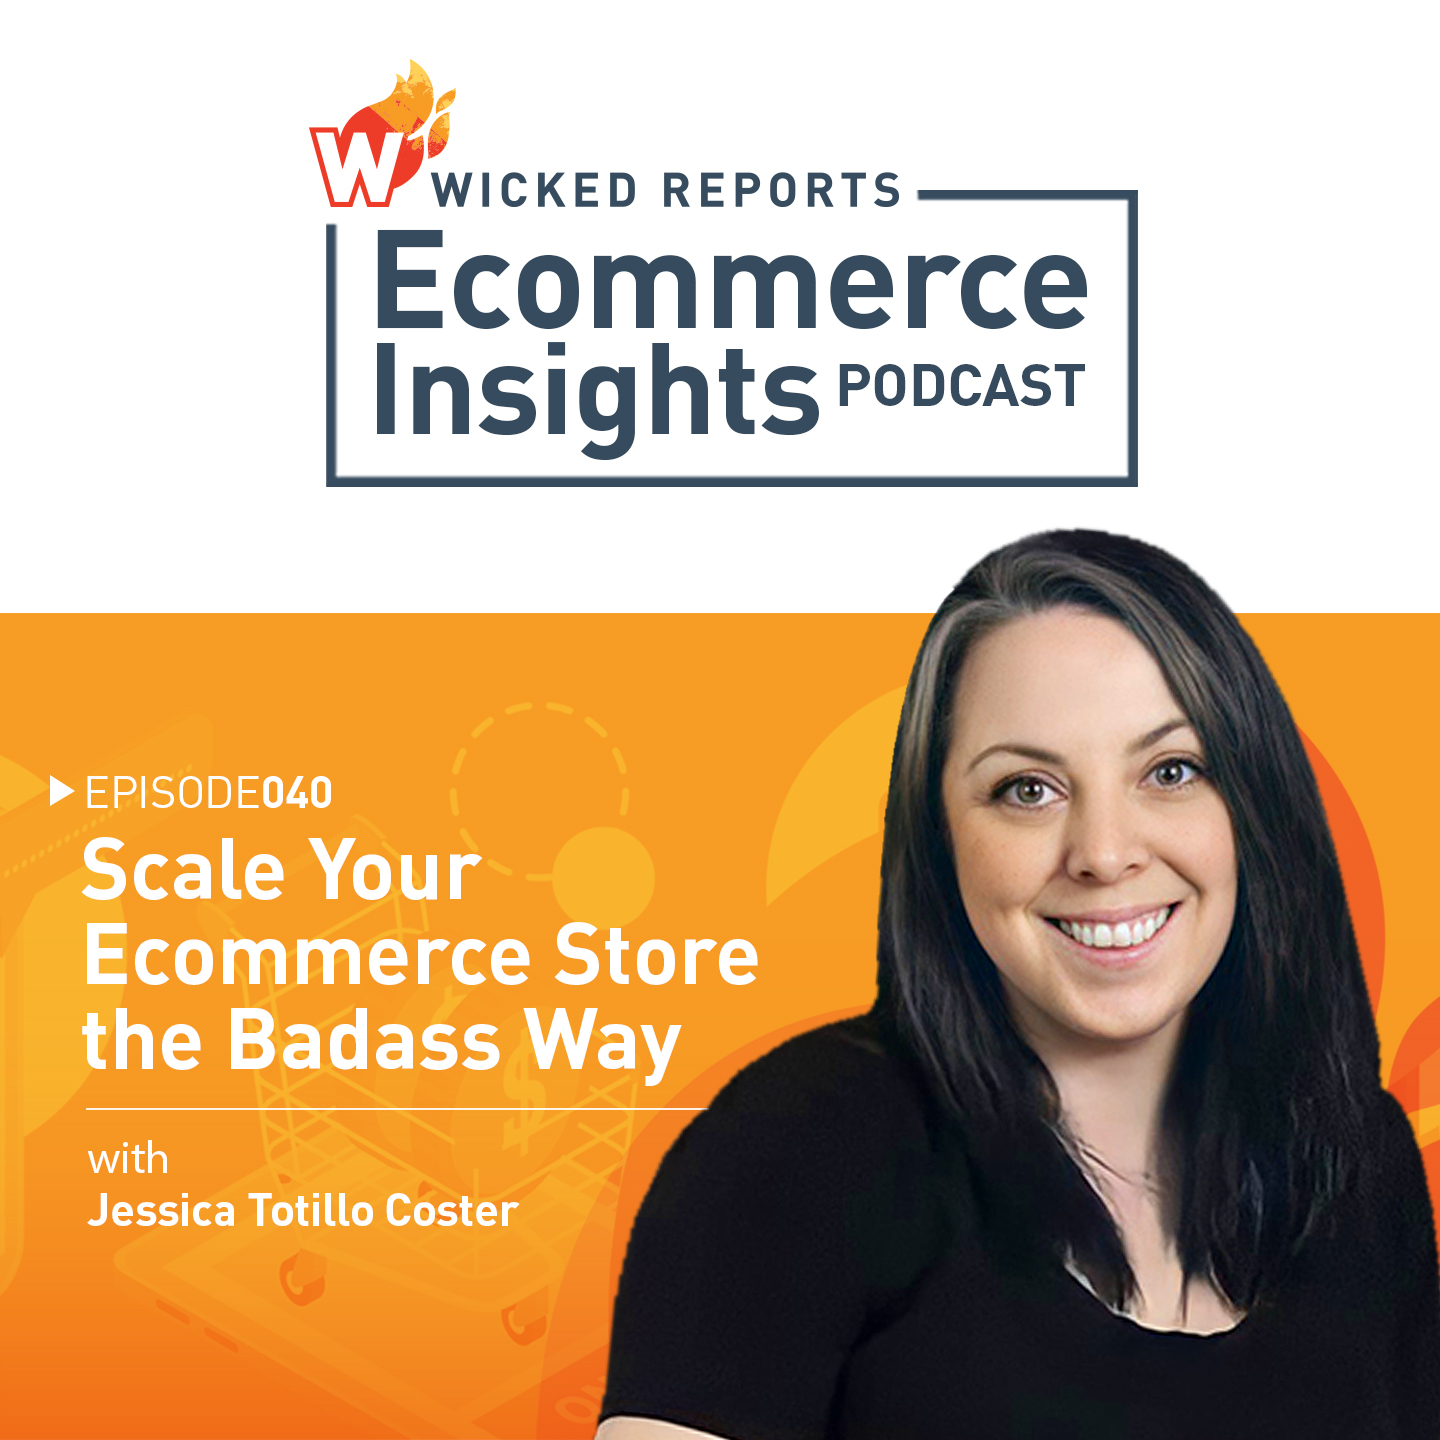 Scale Your Ecommerce Store the Badass Way With Jessica Totillo Coster